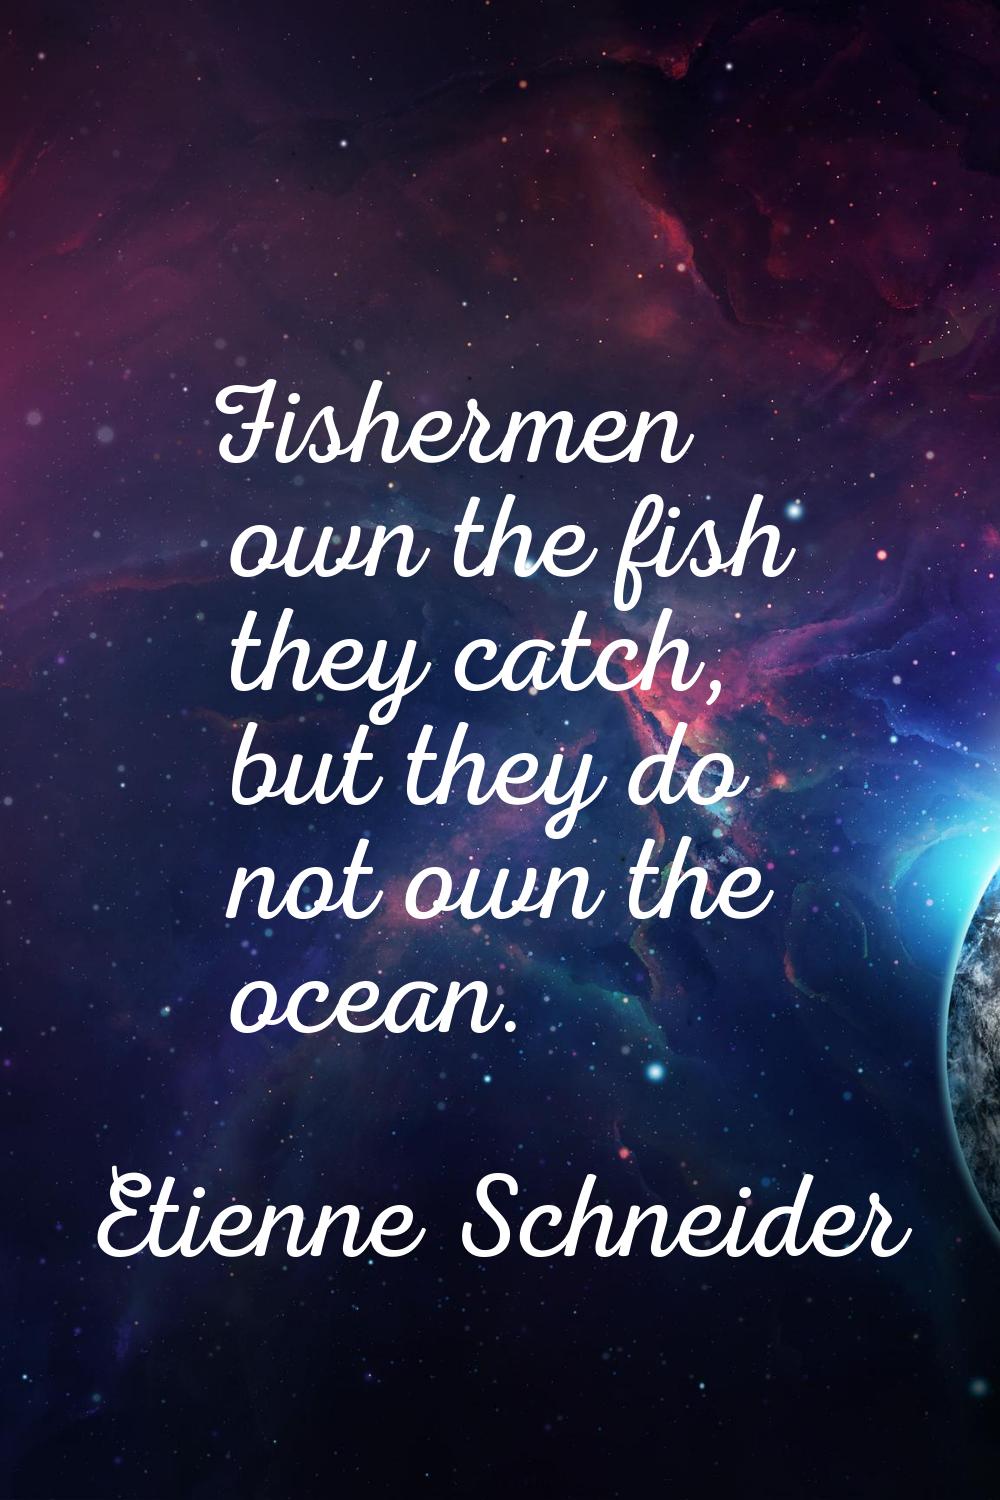 Fishermen own the fish they catch, but they do not own the ocean.